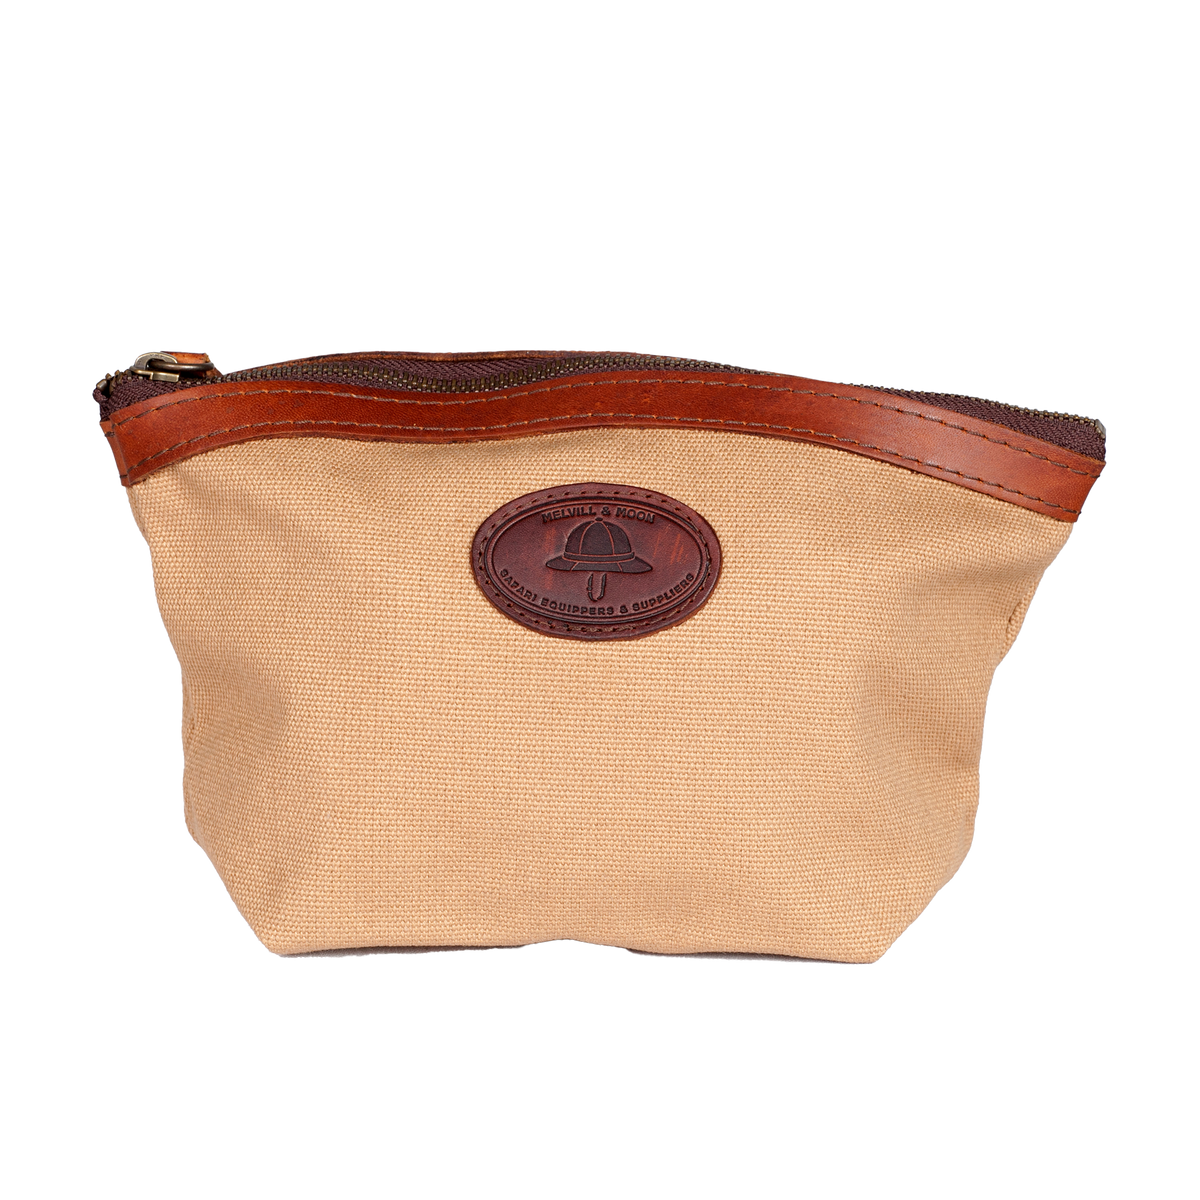 Toto Cosmetic Bag   Melvill & Moon USA- Overland Kitted